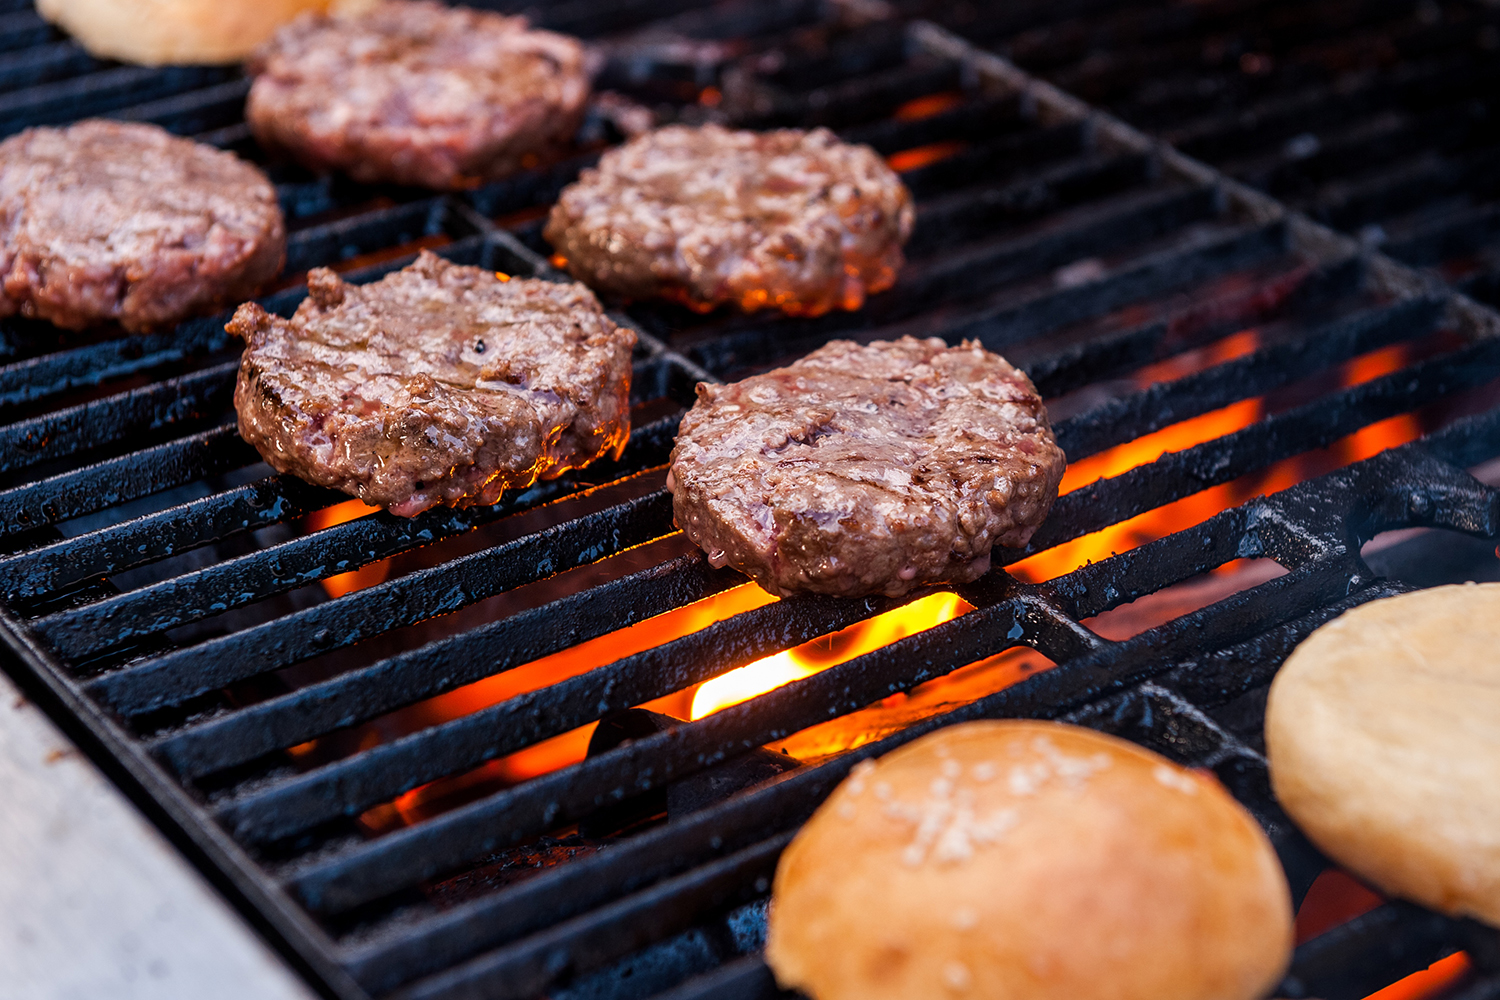 https://www.themanual.com/wp-content/uploads/sites/9/2019/07/how-to-grill-a-burger-barbecue.jpg?p=1